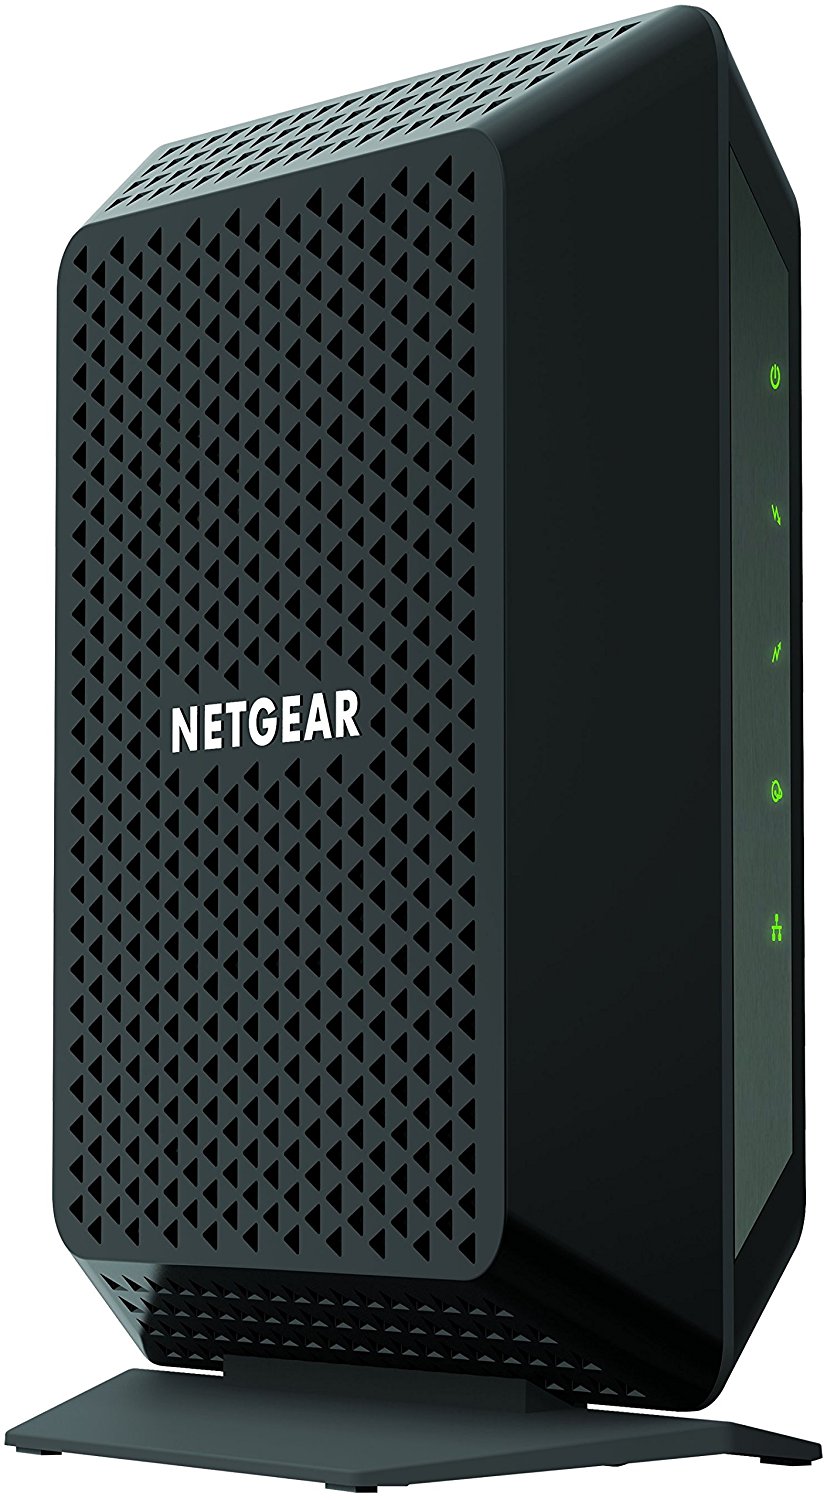 Netgear CM700 DOCSIS 3.0 cable modem for $74 with promo code